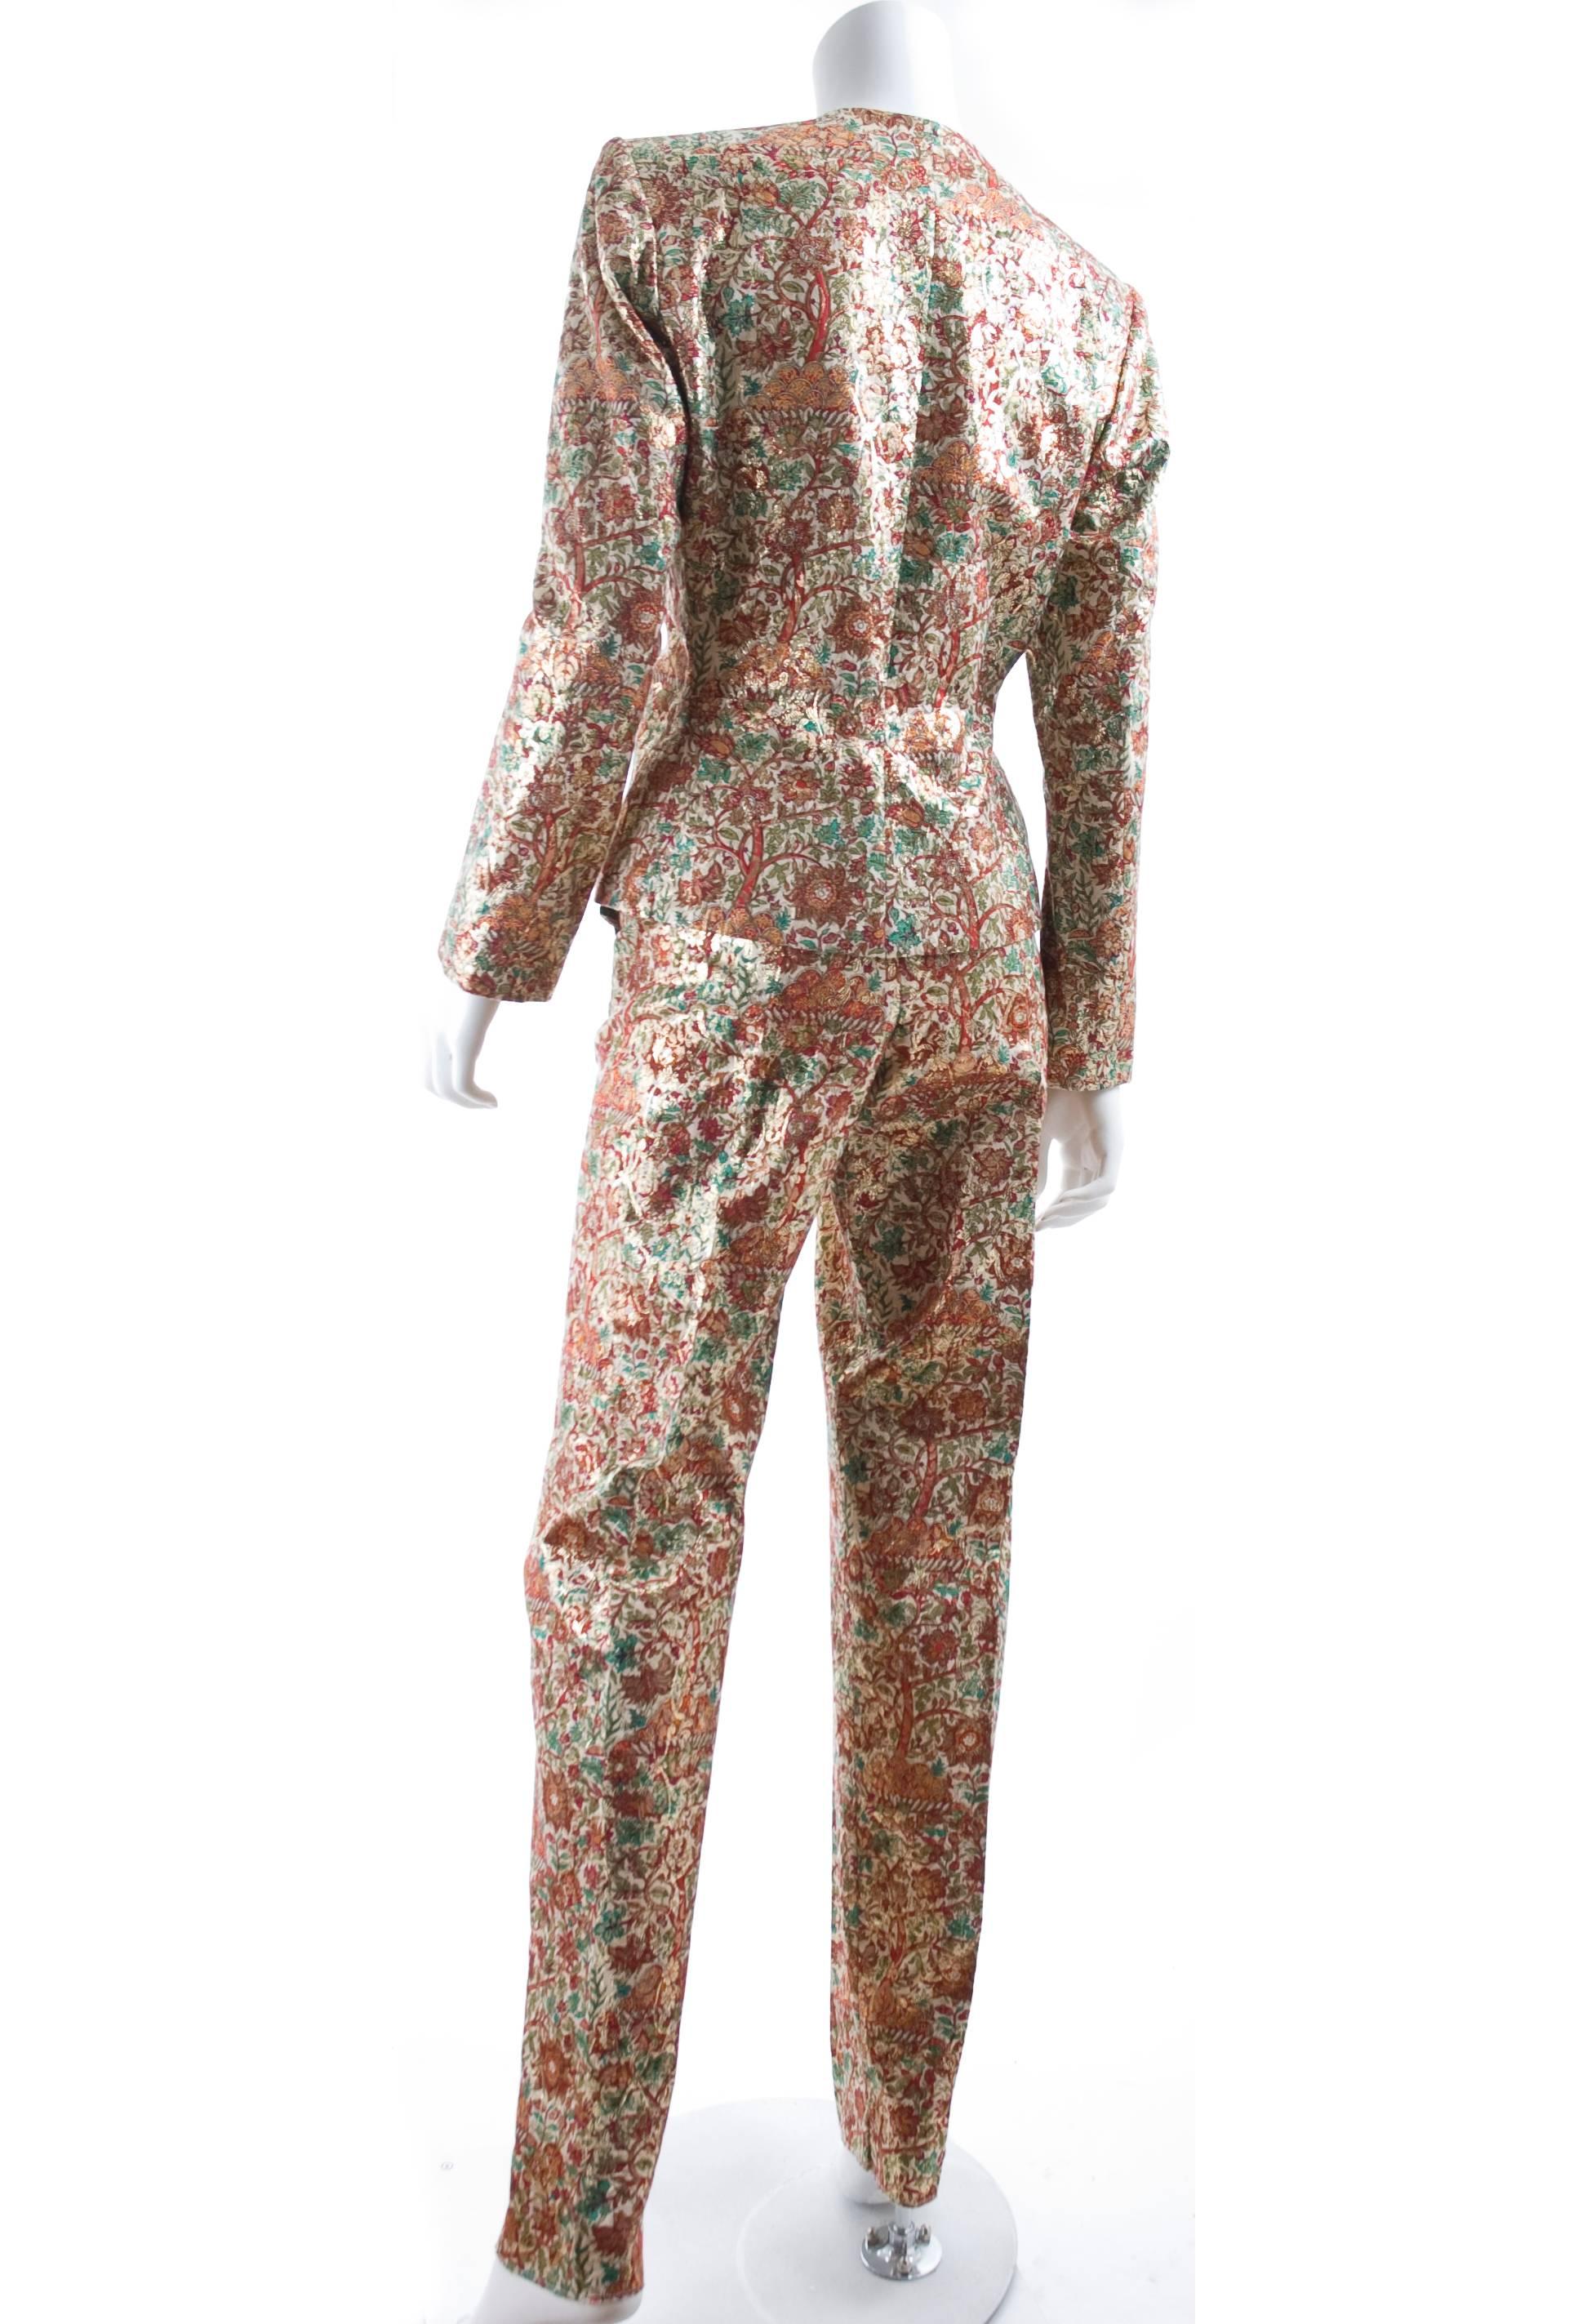 Vintage Yves Saint Laurent Brocade Suit in Gold, Red and Green In Excellent Condition For Sale In Hamburg, Deutschland